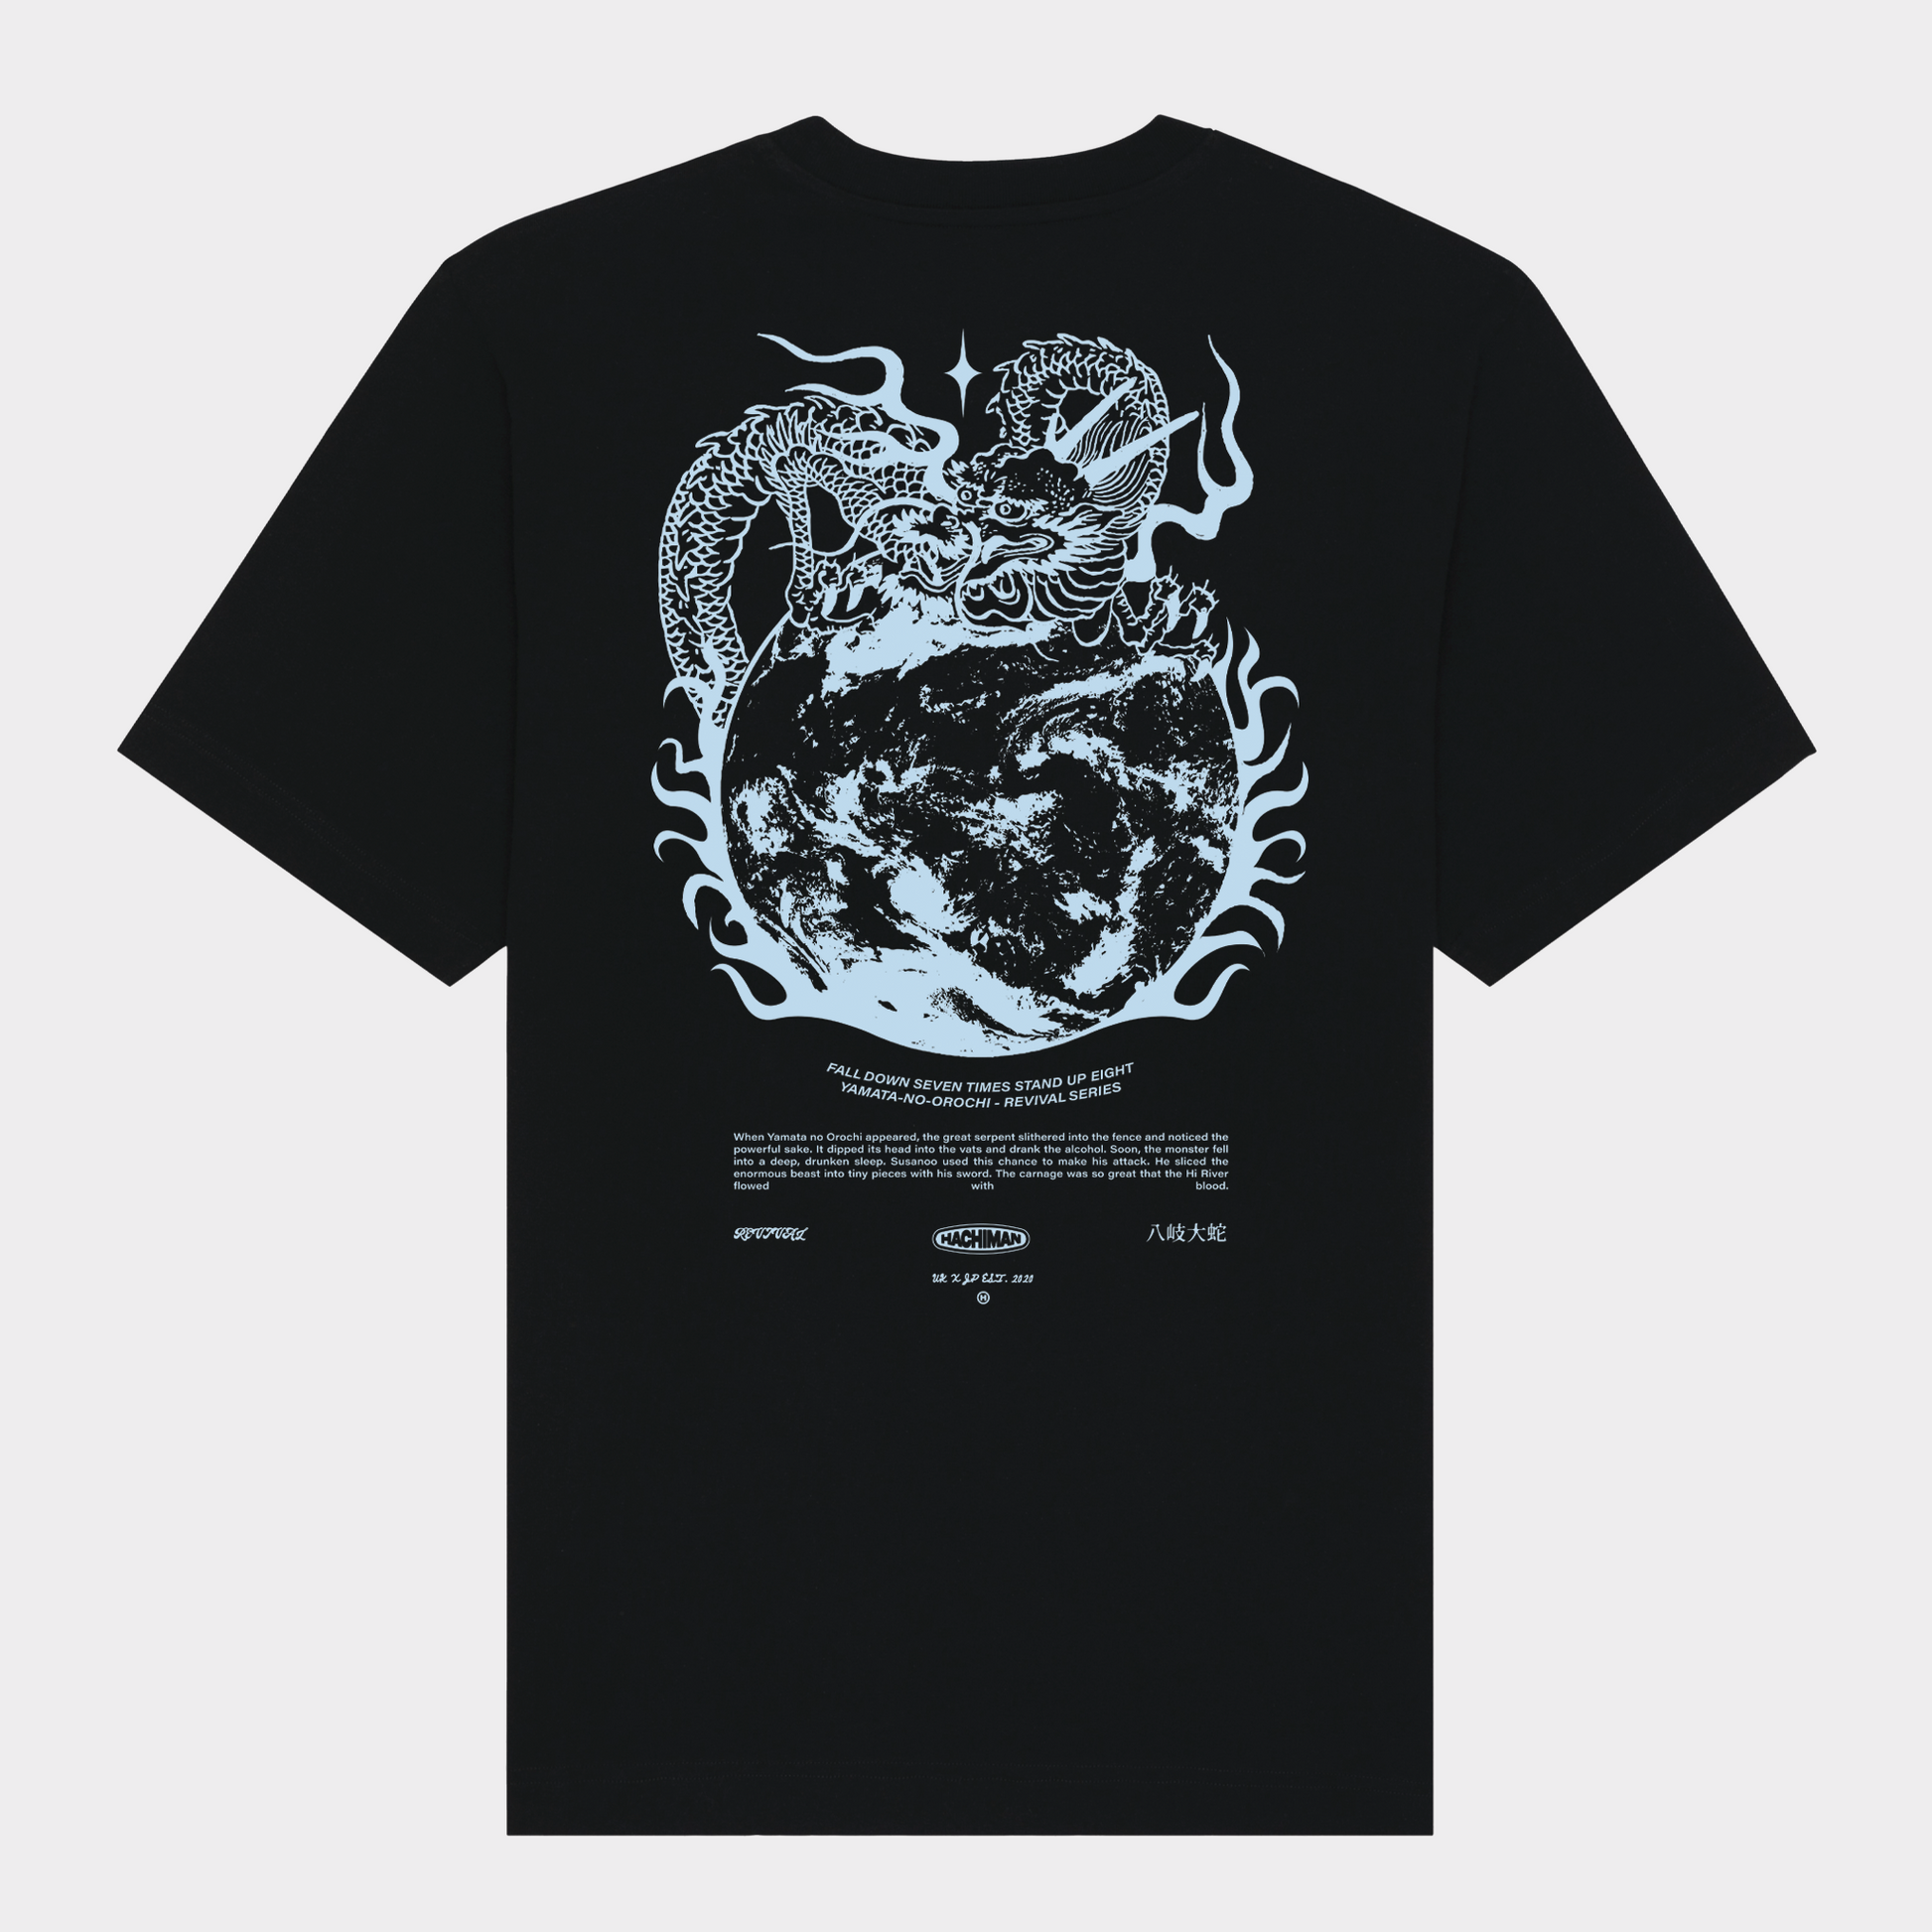 Hachiman JPN Black oversized organic t-shirt featuring a light blue back print of a Japanese dragon wrapped around earth engulfed in flame.